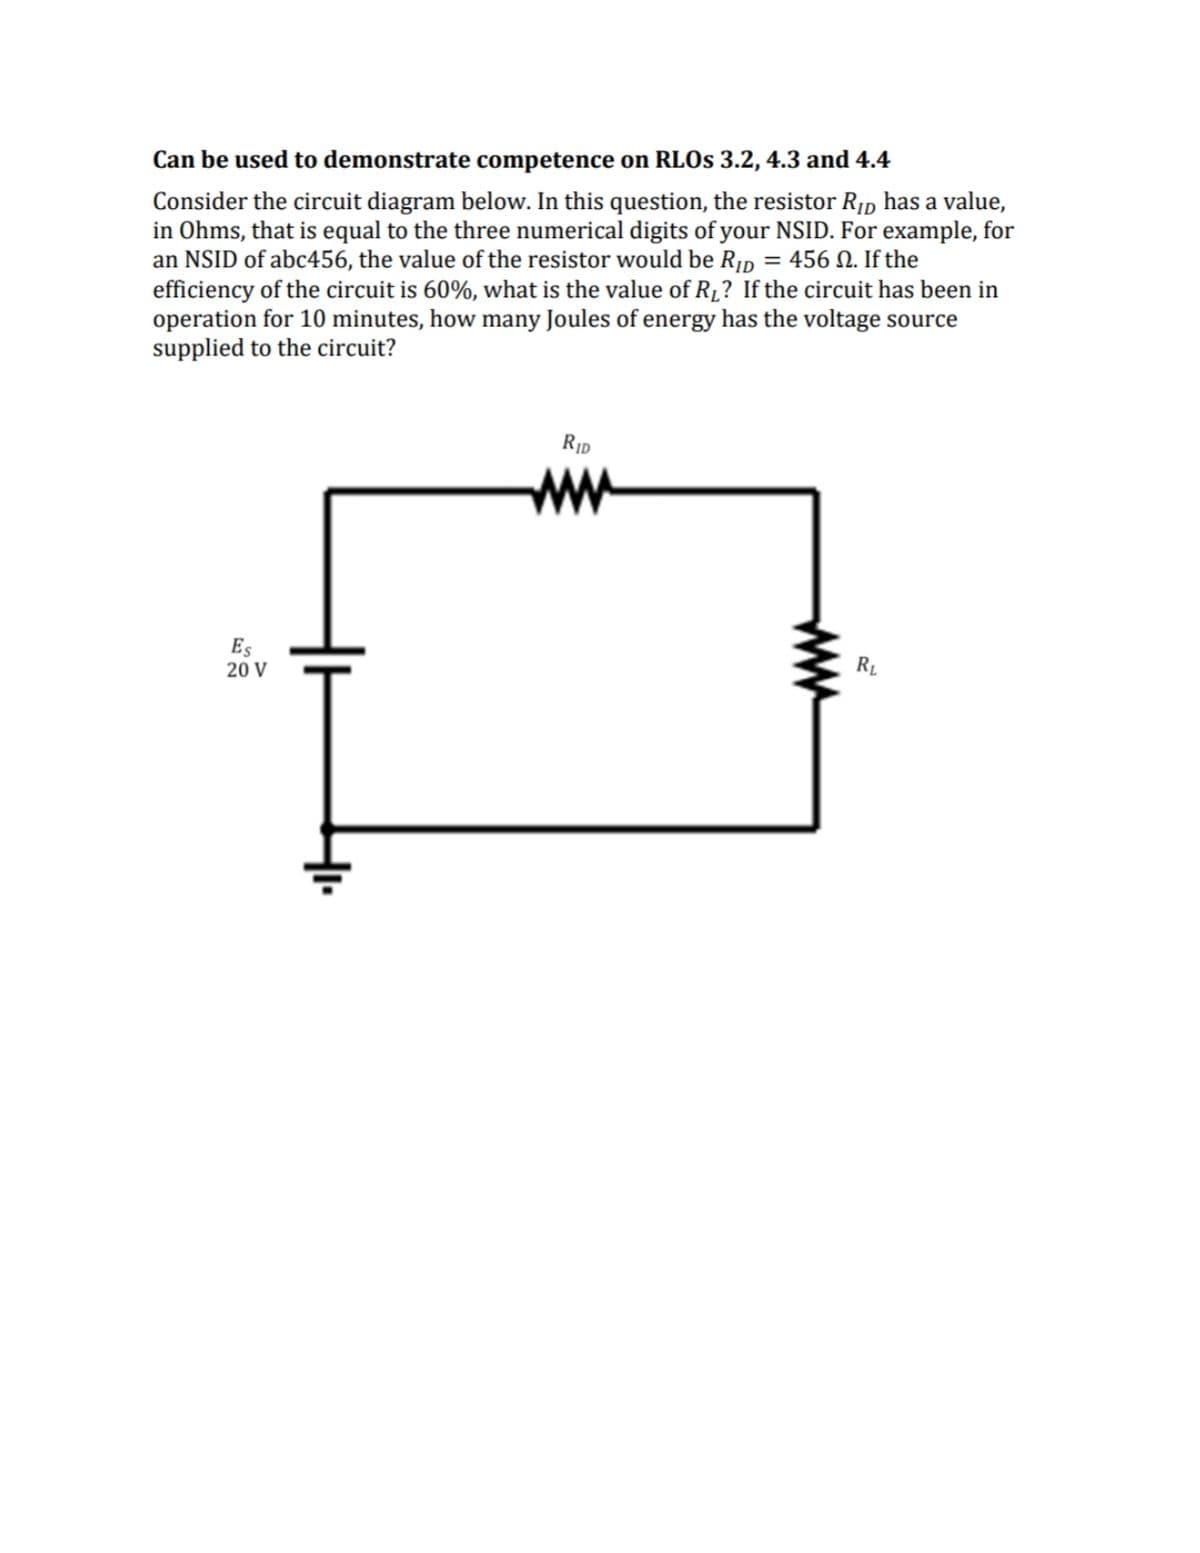 Can be used to demonstrate competence on RLOS 3.2, 4.3 and 4.4
Consider the circuit diagram below. In this question, the resistor Rip has a value,
in Ohms, that is equal to the three numerical digits of your NSID. For example, for
an NSID of abc456, the value of the resistor would be R¡D
efficiency of the circuit is 60%, what is the value of R1? If the circuit has been in
operation for 10 minutes, how many Joules of energy has the voltage source
supplied to the circuit?
= 456 N. If the
ww
Es
20 V
R.
ww
